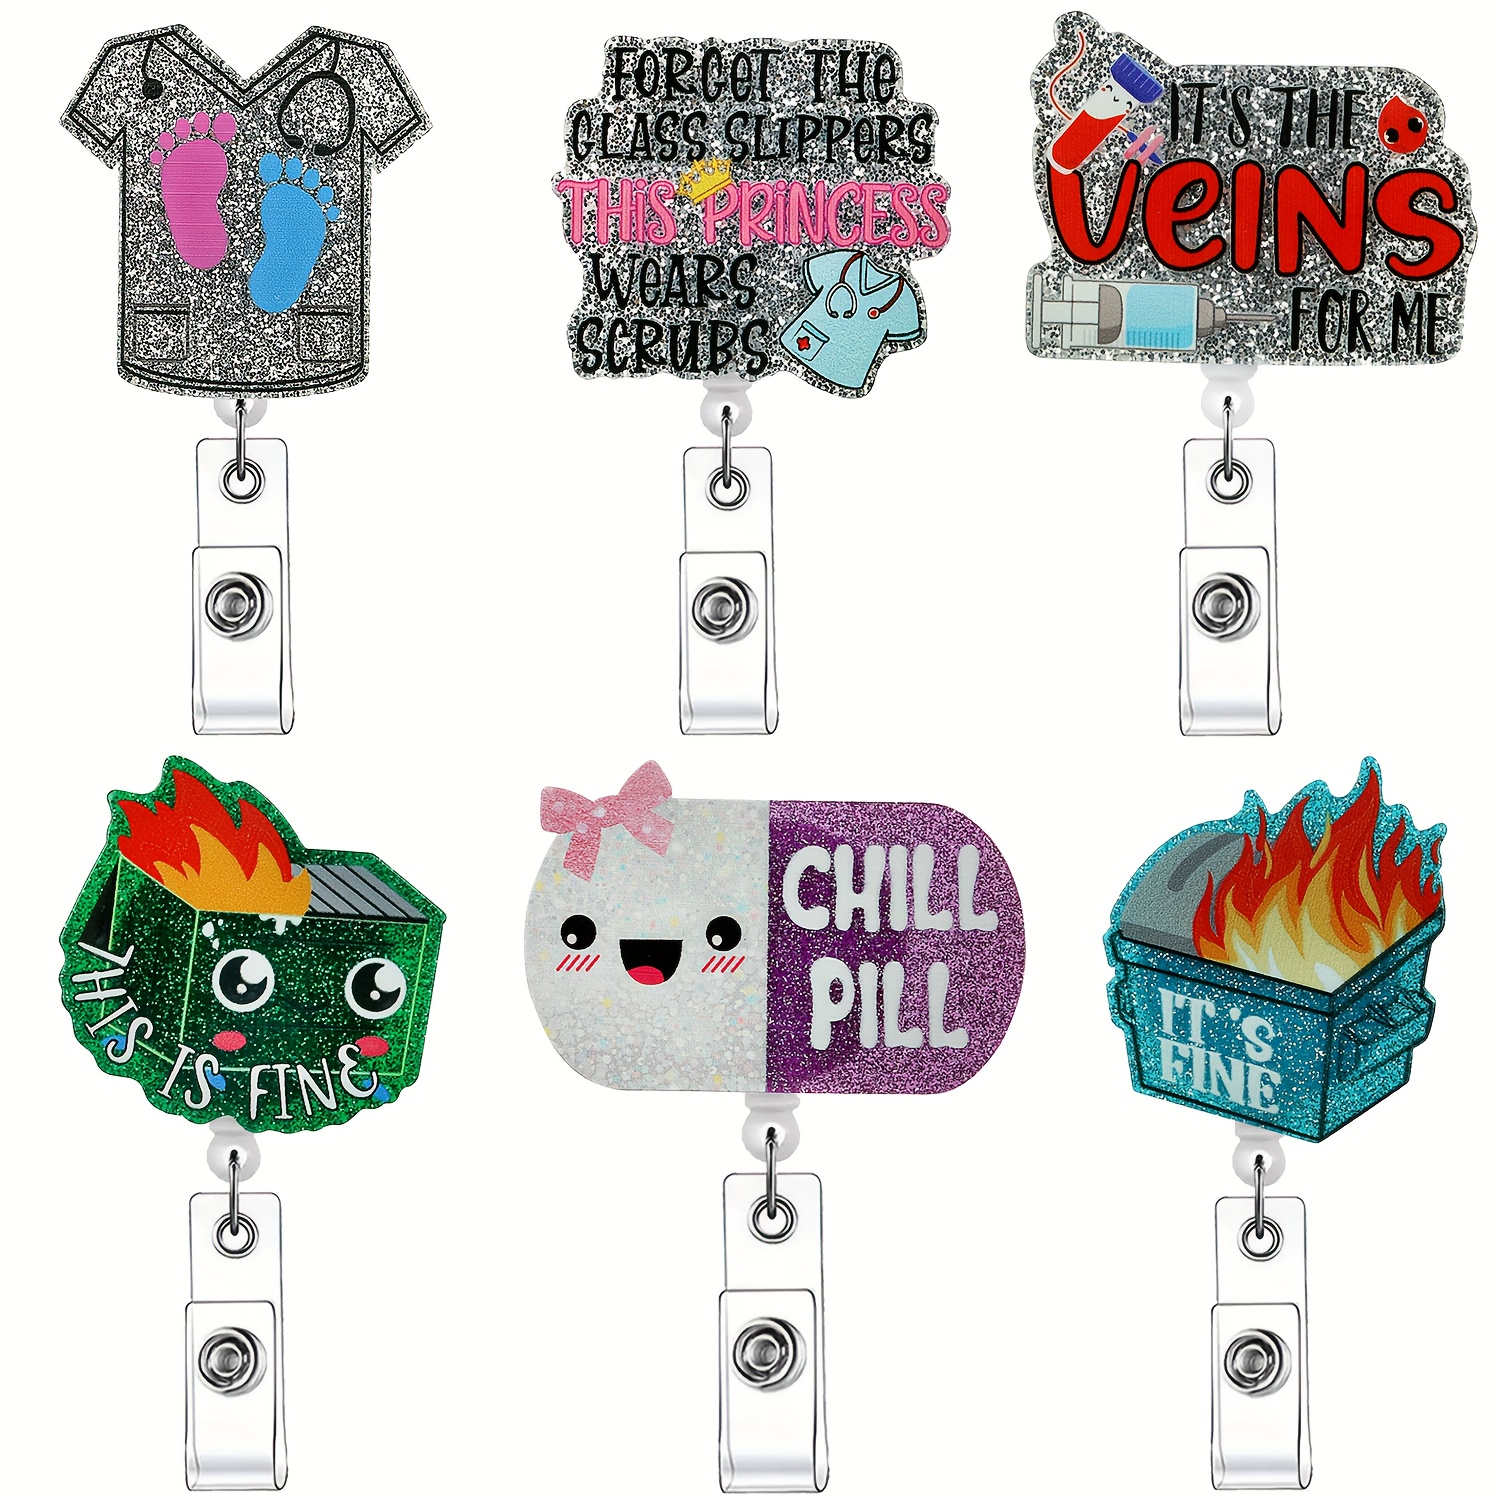 We've got lots of fun options from badge reels and tshirts to